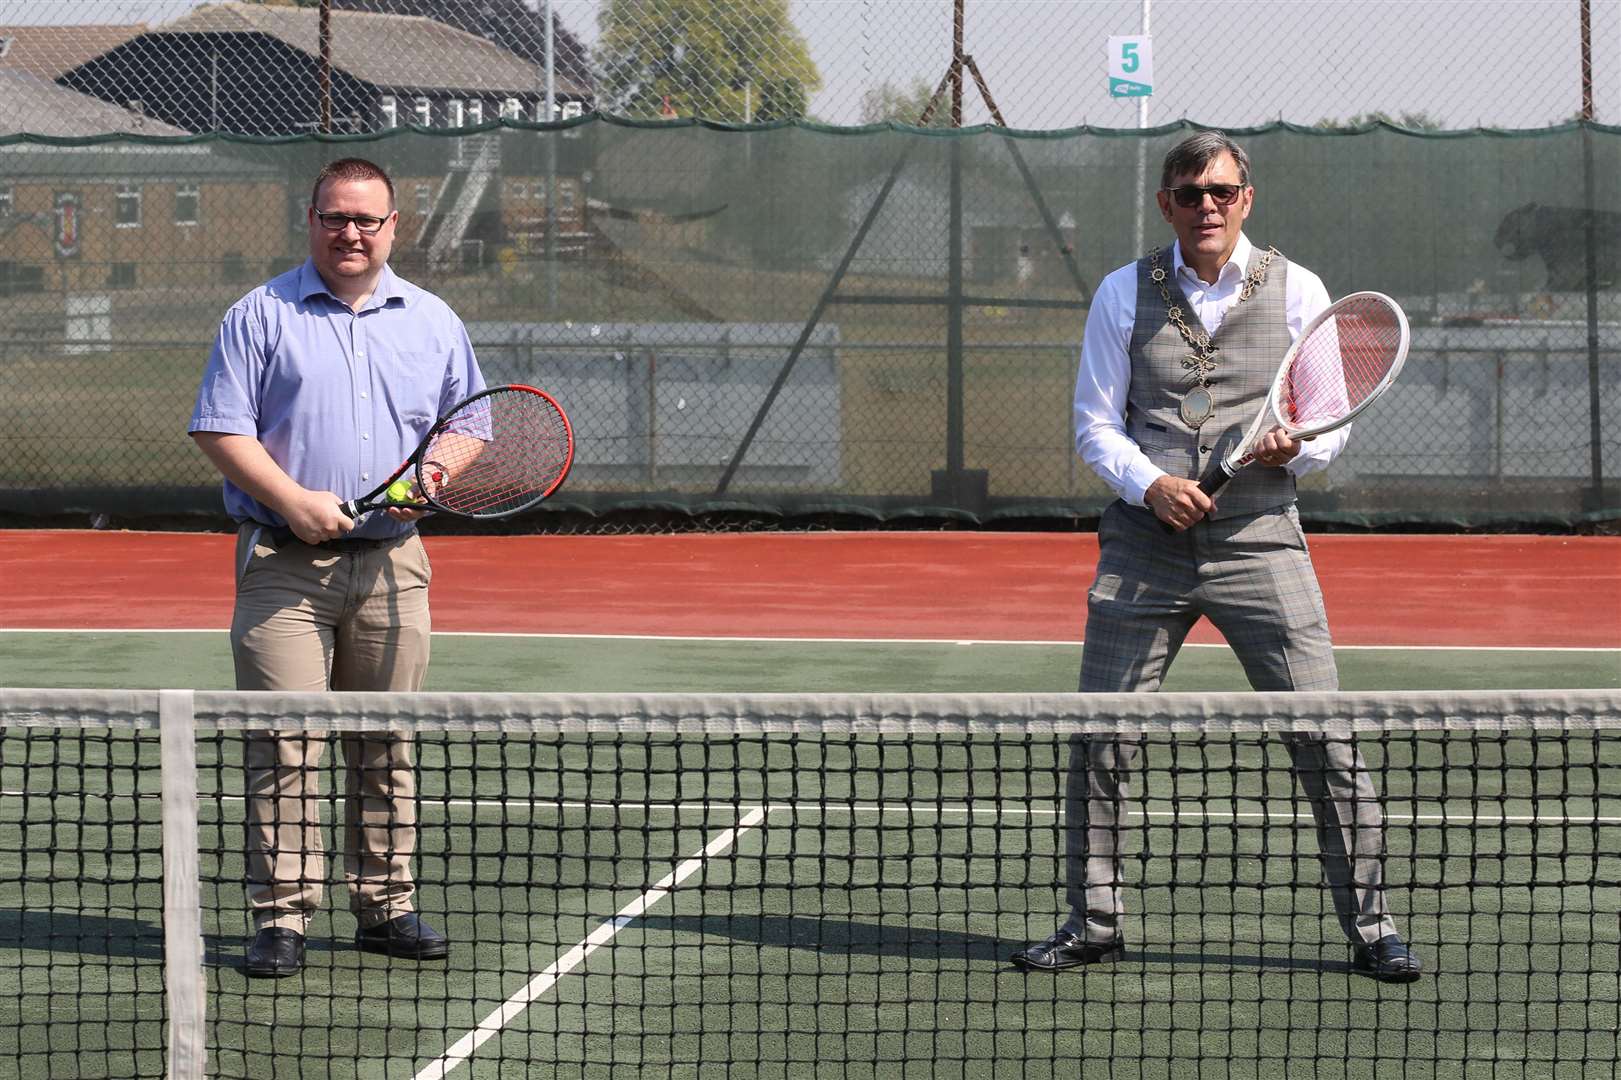 Gravesham mayor John Caller, right, with Cllr Shane Mochrie-Cox at Gravesham Tennis Club. Picture: Rob Powell